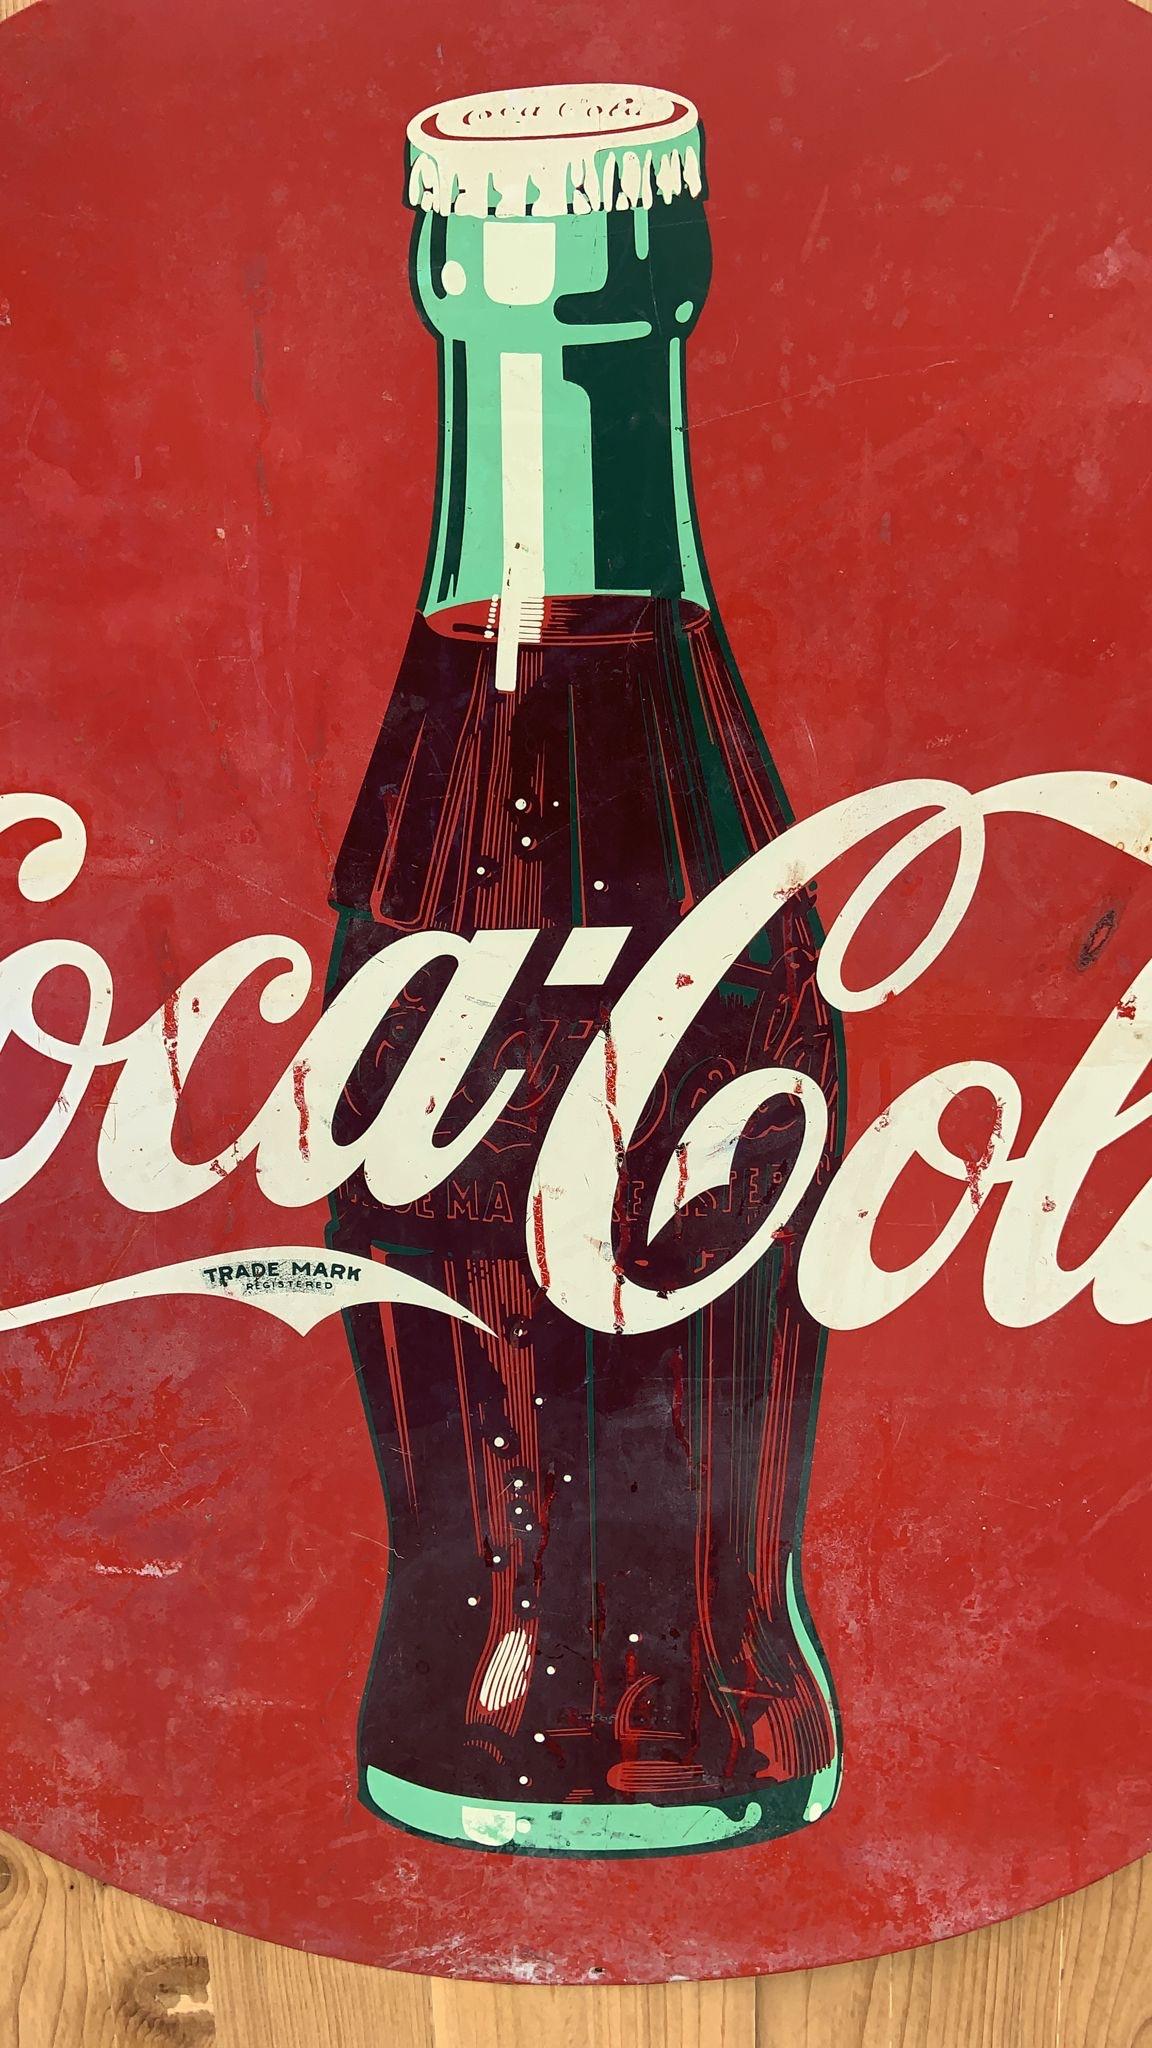 Vintage Metal Coca-Cola Wall Sign

This Coca-Cola sign is sure to be a talking point in any room. A Coca-Cola collector must have!

Circa: 1950s

Dimensions:
D 45.5”
